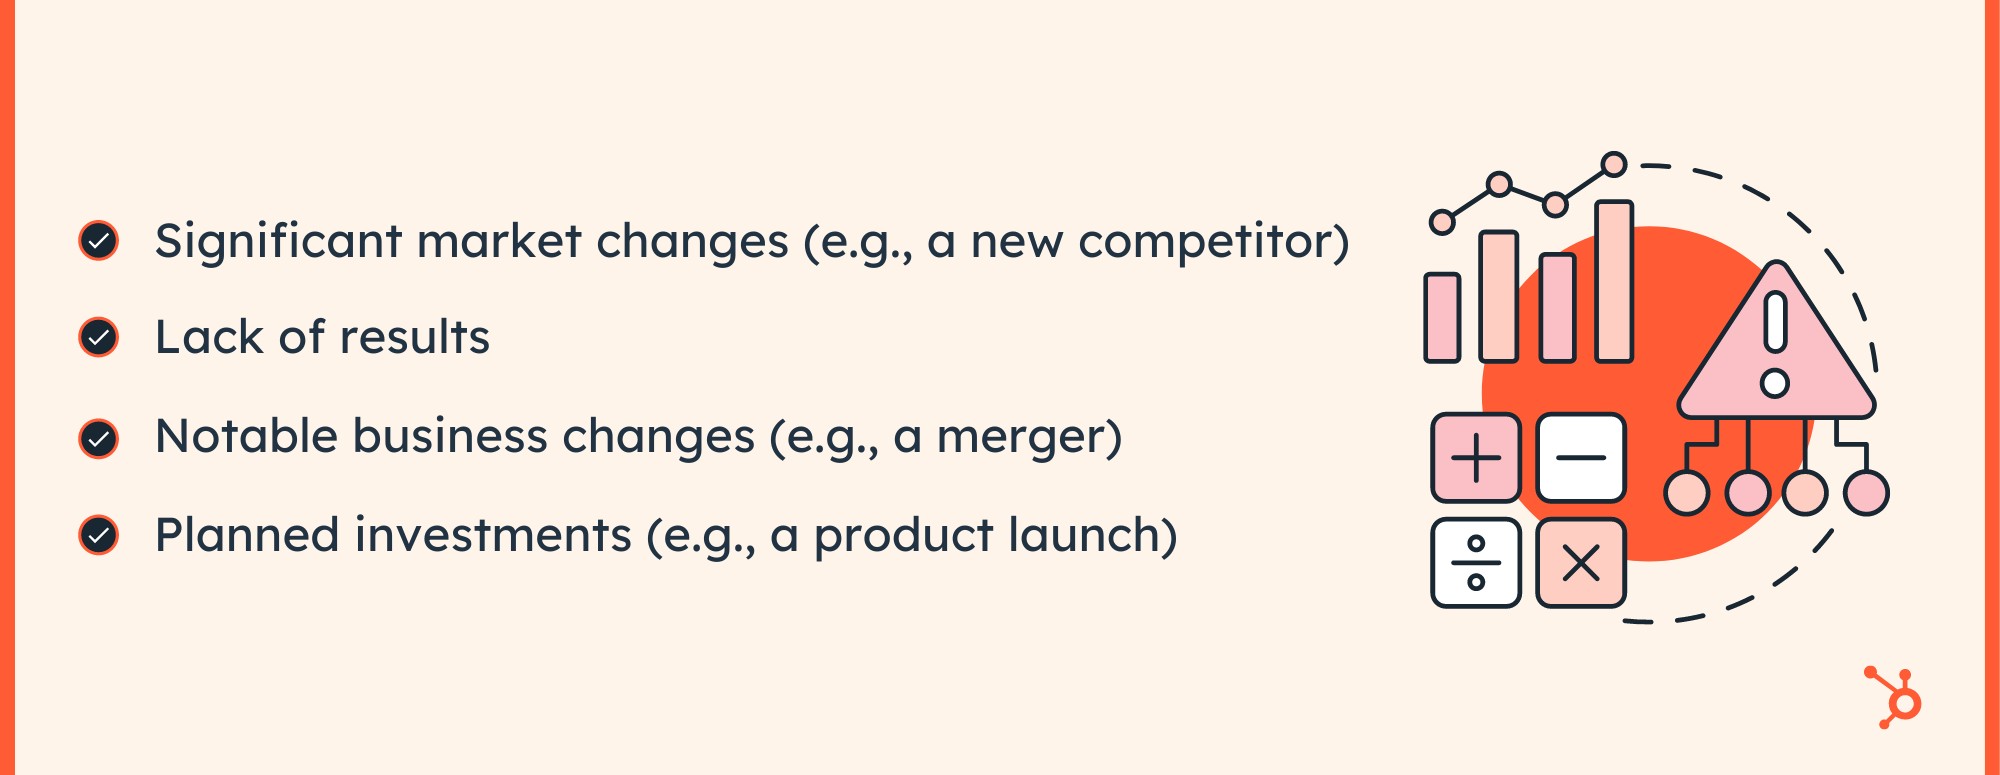 Marketing Audit Triggers: significant market changes (e.g., a new competitor), lack of results, notable business changes (e.g., a merger), and/or planned investments (e.g., a rebrand or new product launch).